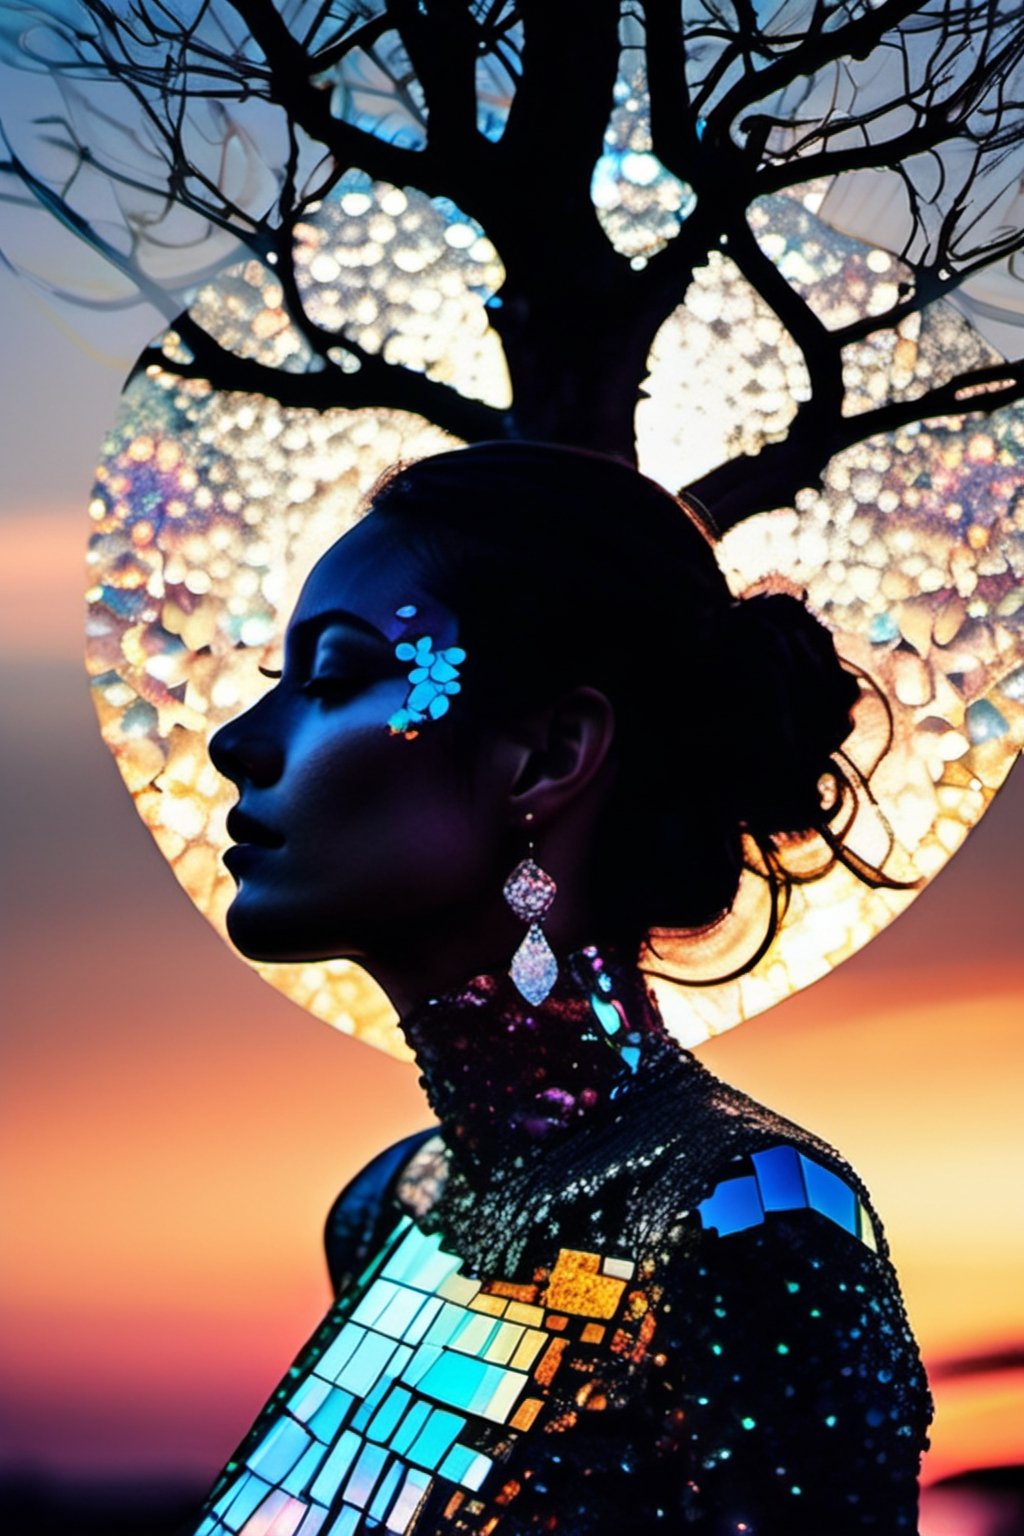 (Double exposure:1.3) photo of a noble lady made of mosaic of iridescent crystal glass with sub scattering mirror surface imposing onto transparent tree hollow trunk in living brocade underbust dress made out of flowers, bokeh sky by Peter Gric, Conrad Roset, Brandon Kidwell, Andreas Lie, Dan Mountford, Dan Witz, Agnes Cecile, Jeremy Mann, fine art, super dramatic moonshine, silhouette photoillustration, amazing depth, intricate detailed fine cracked surface, stunning atmosphere, mesmerizing whimsical vibrant scenery, complex masterwork by head of prompt engineering,